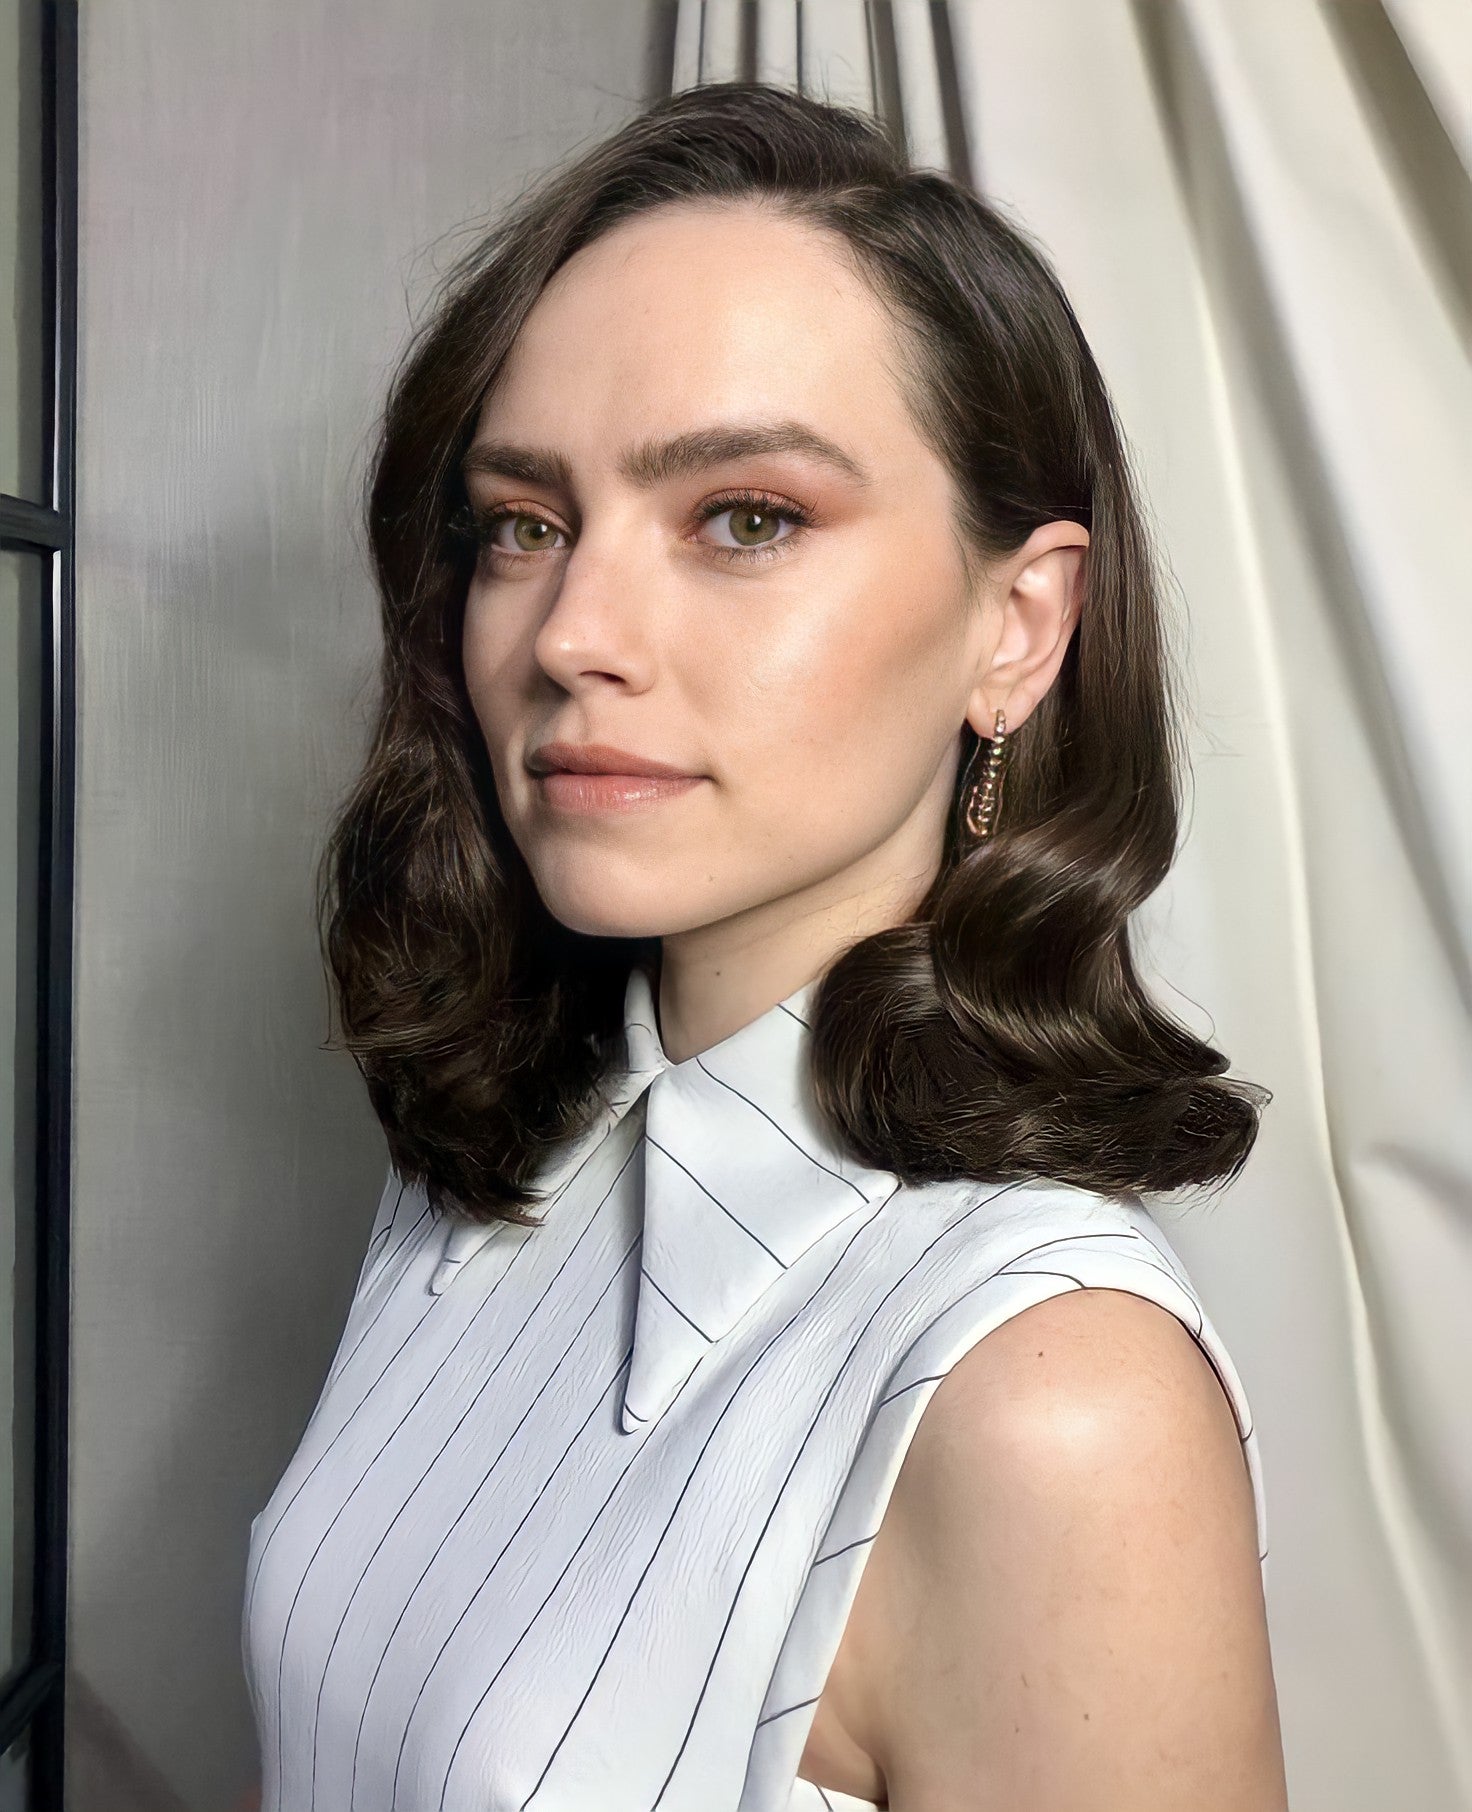 Daisy Ridley Is Another Pale Bitch That Needs Her Throat Fucked Hard Like Its A Fleshlight